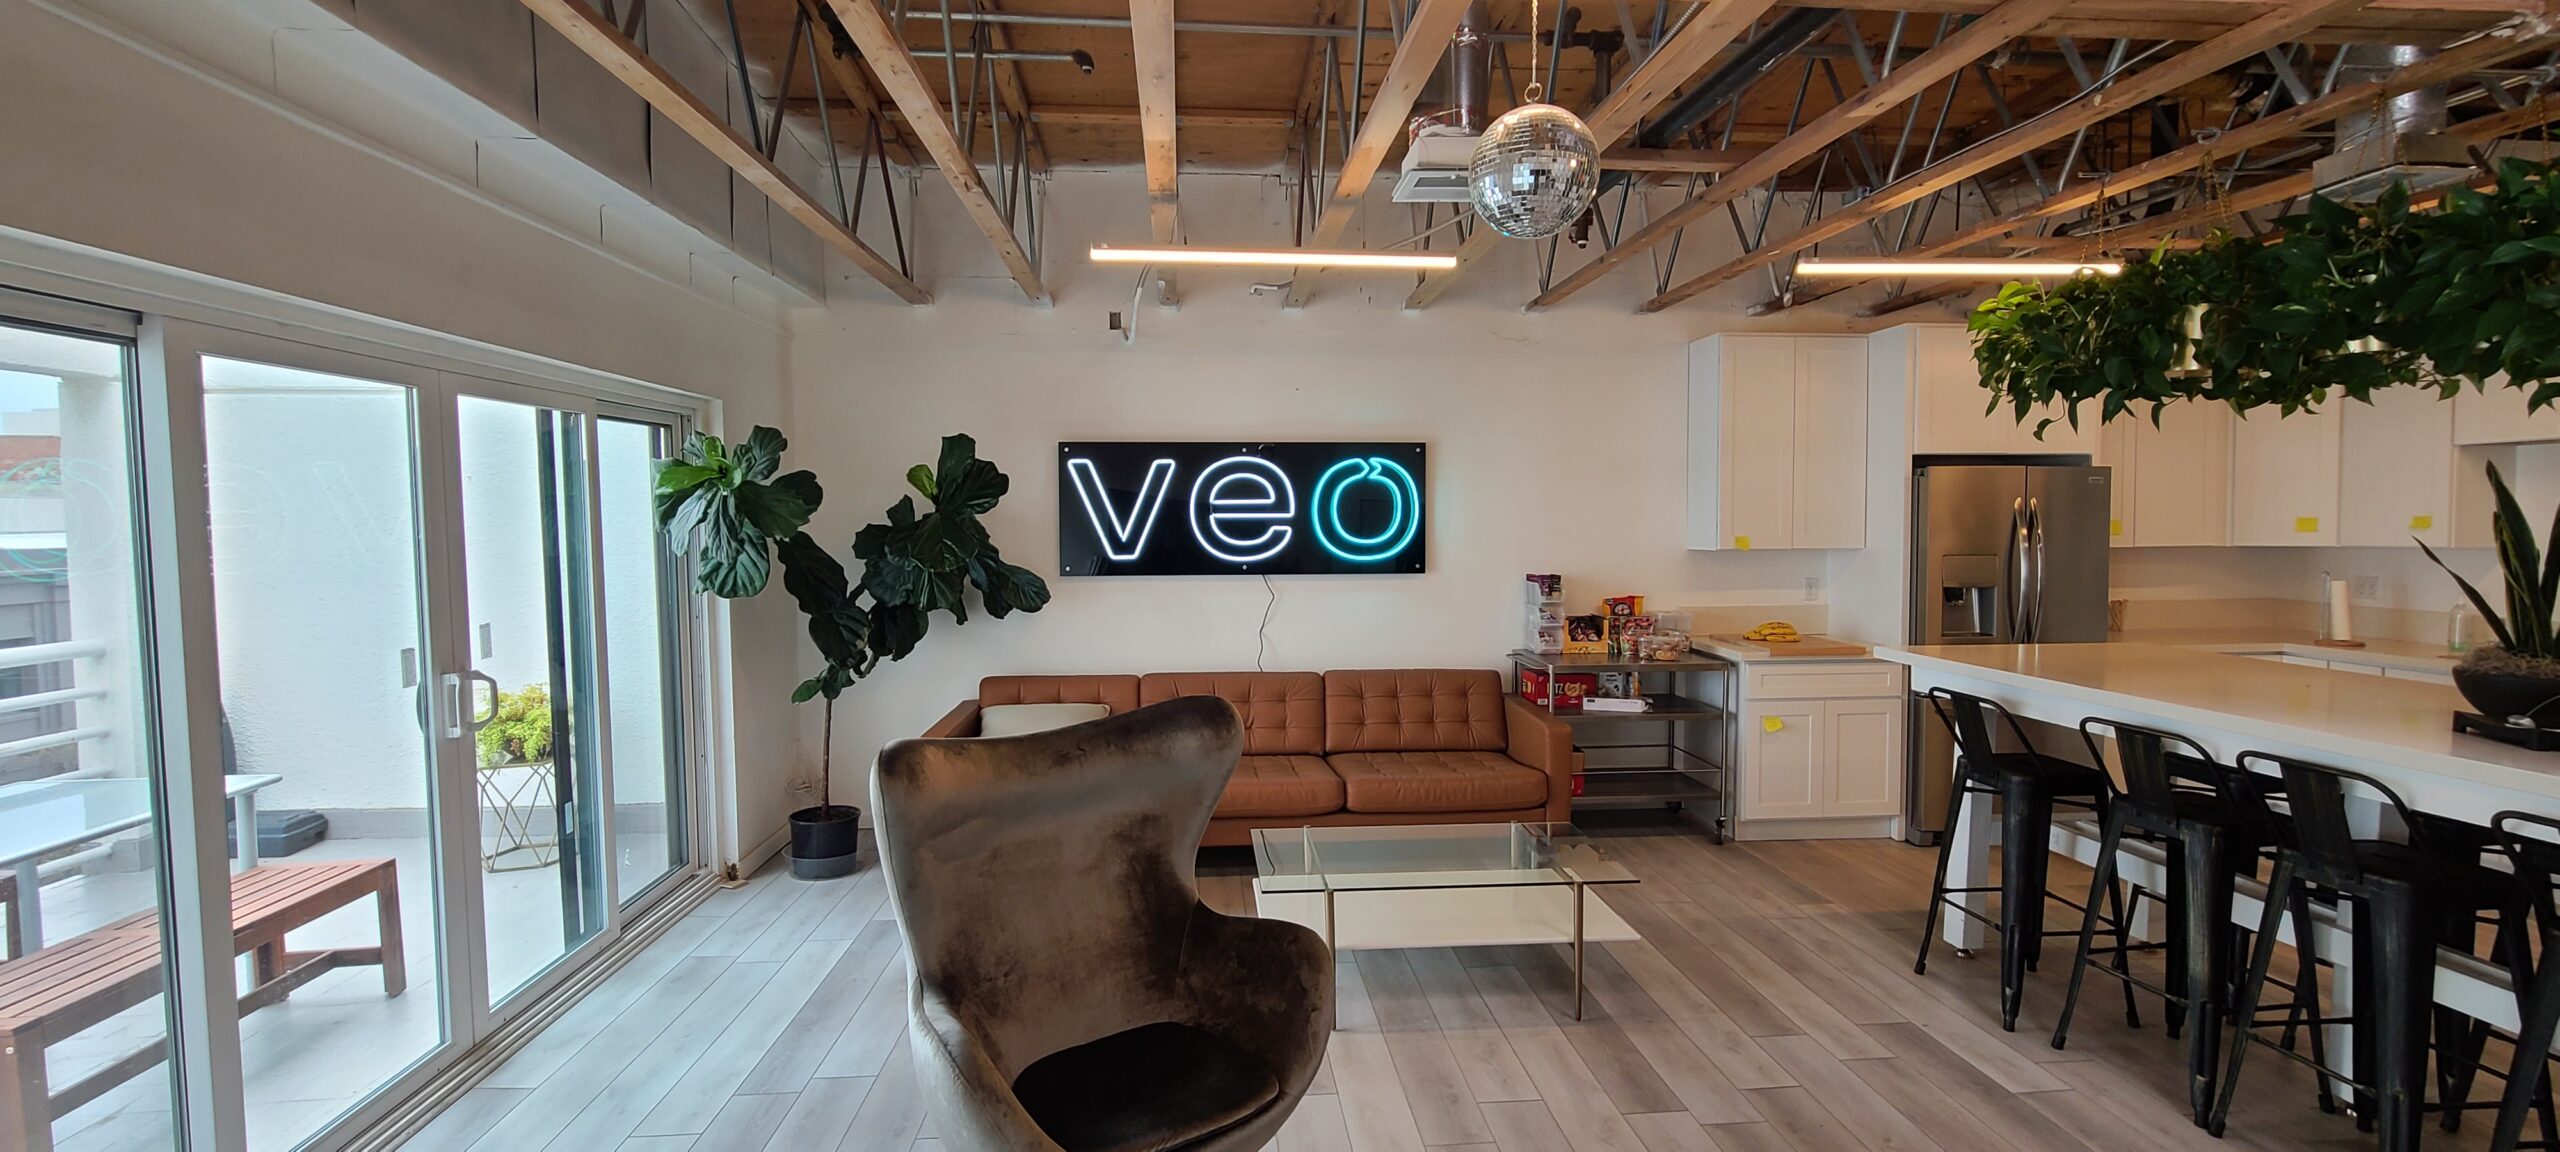 VEO's new neon lobby sign has for their Santa Monica office serves as an impressive centerpiece for their workplace. 